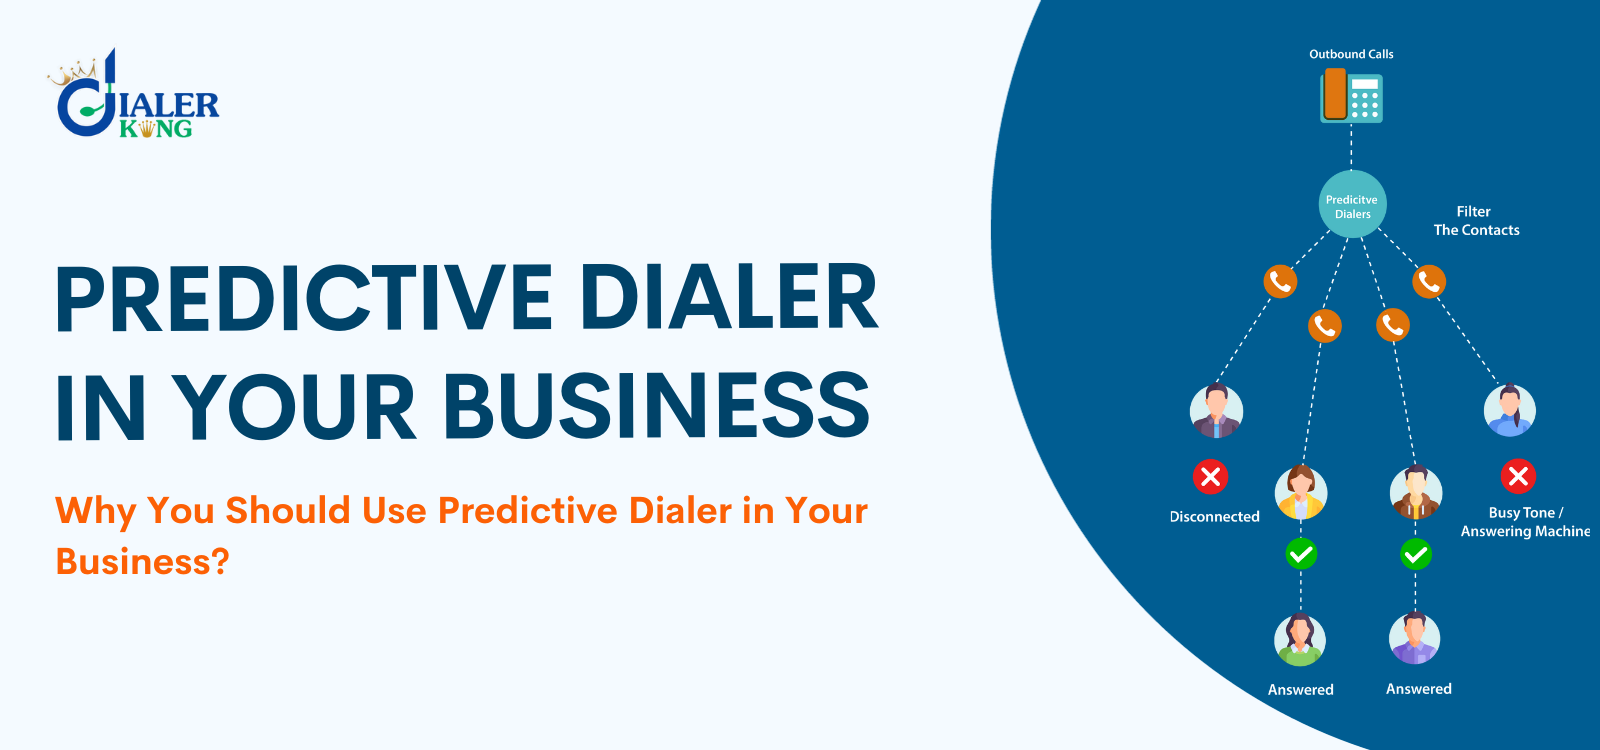 Predictive Dialer in Your Business